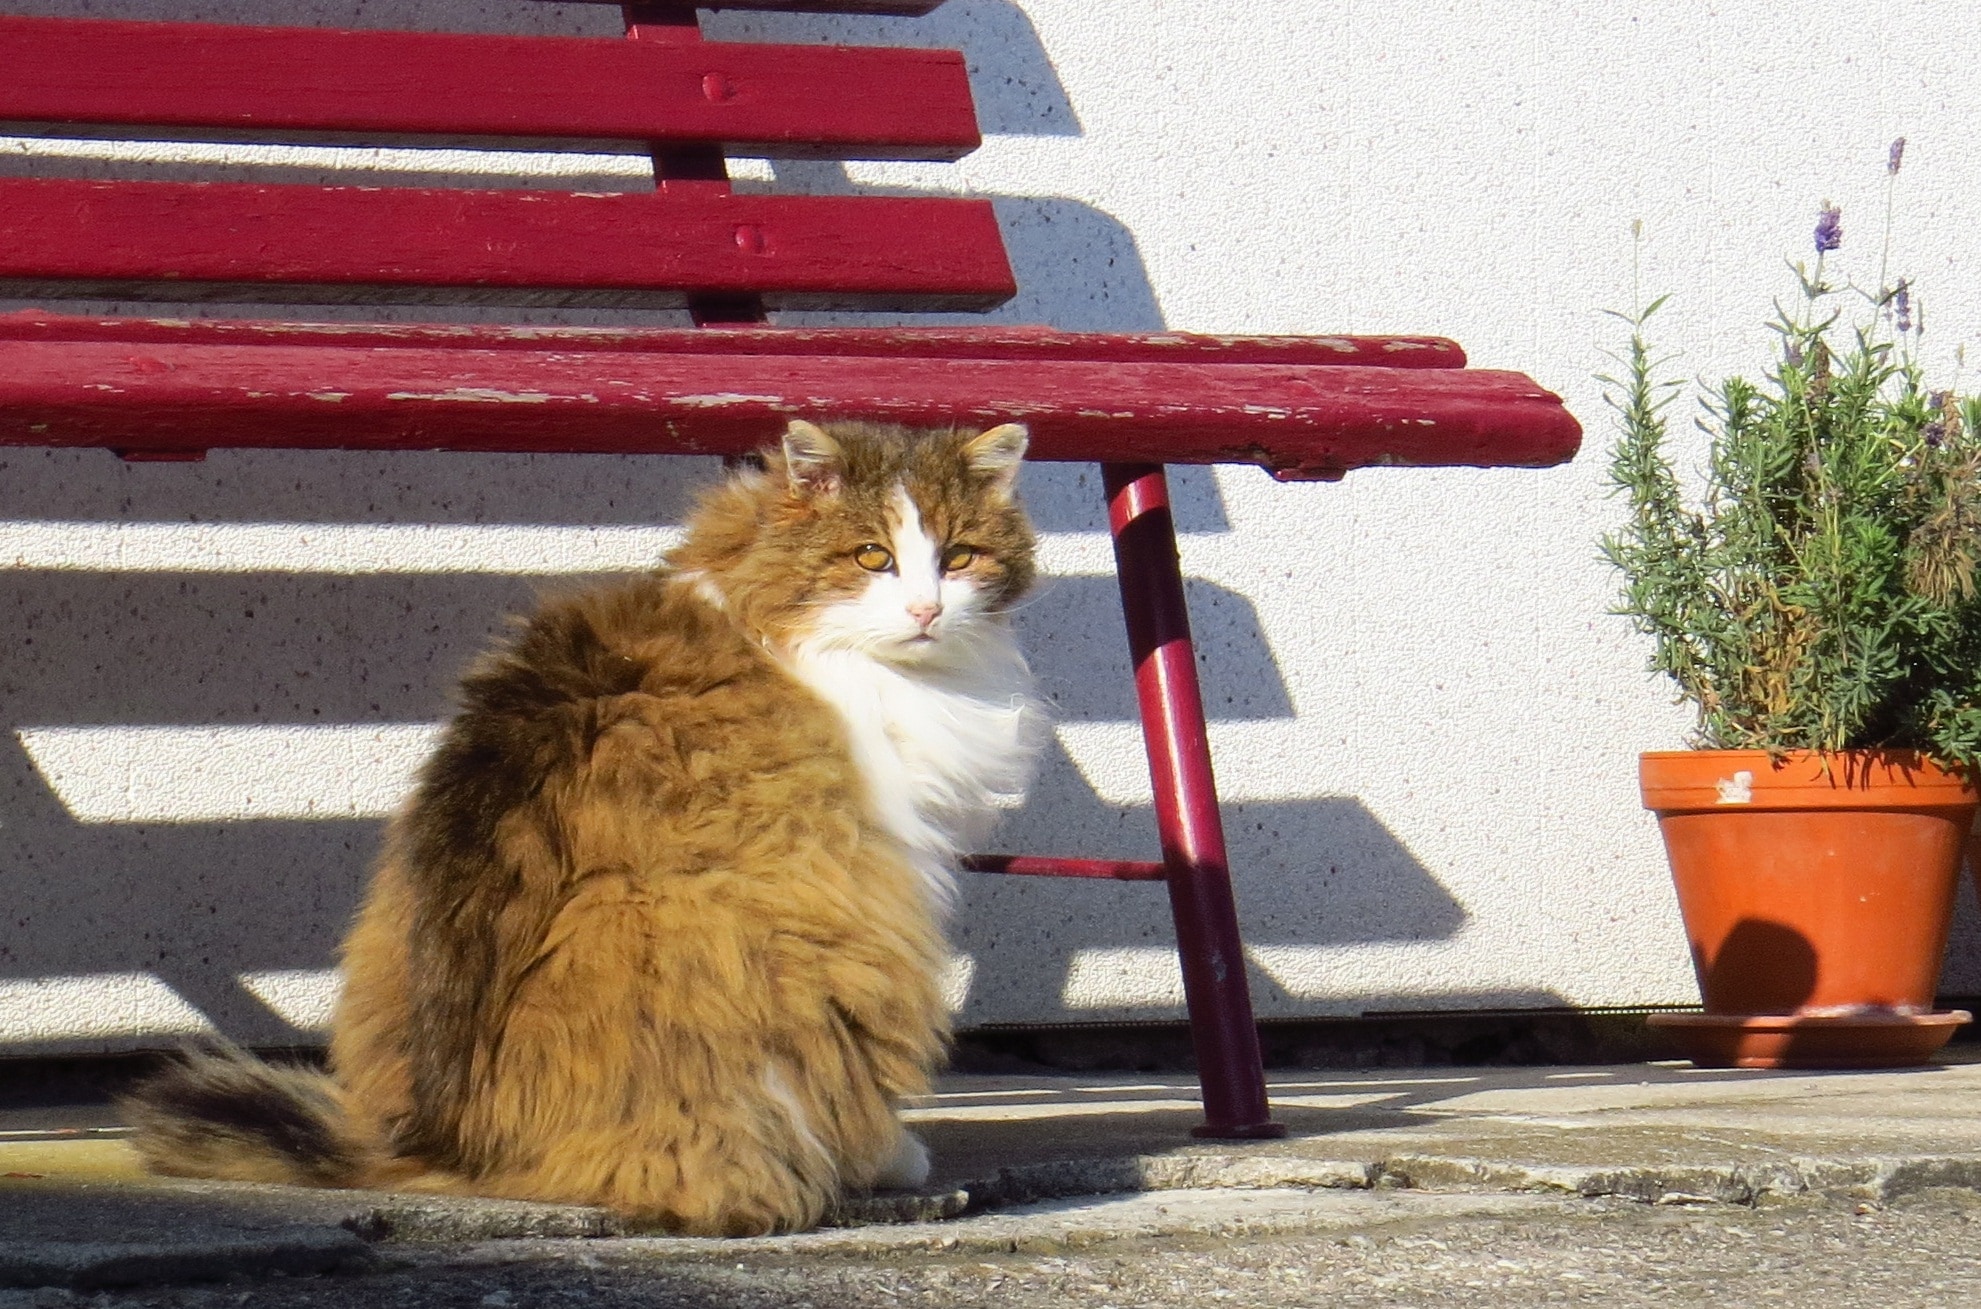 brown and white long fur cat near red metal bench free image | Peakpx